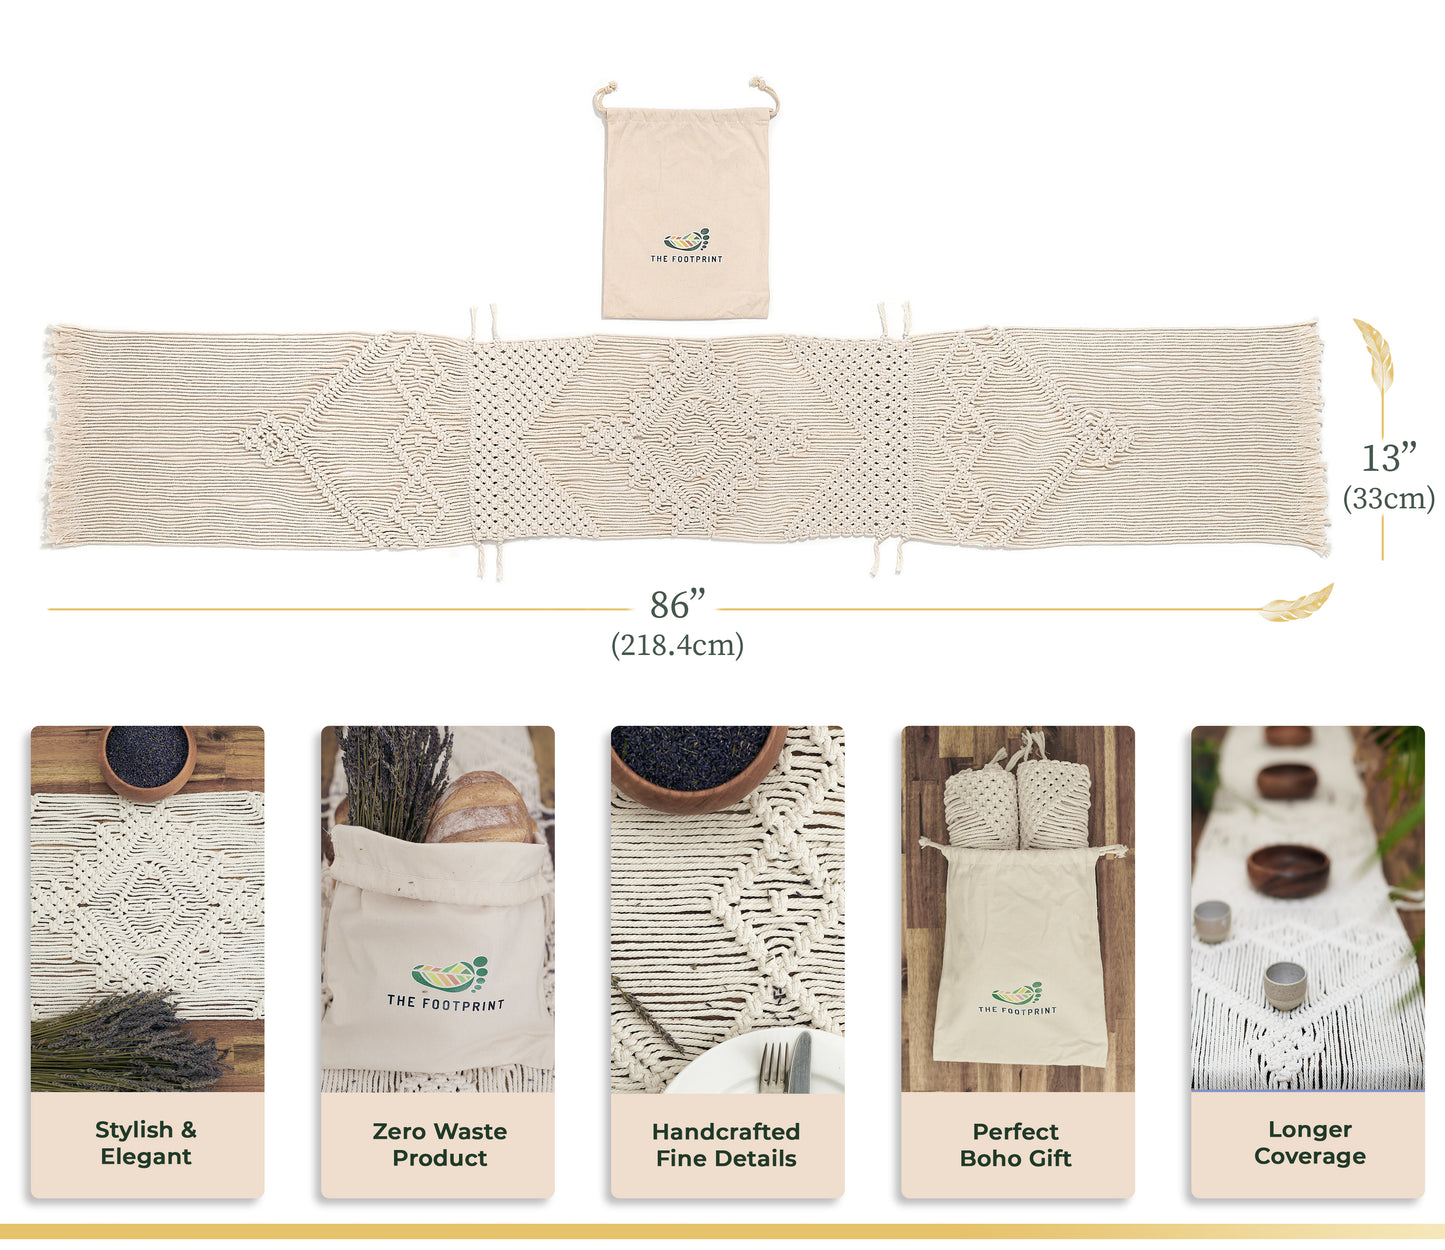 Infographic of macrame table runner and cotton drawstring pouch - dimensions marked and beniefits are highlighted as stylish and elegant, zero waste product, handcrafted fine details, perfect boho gift, longer coverage. 